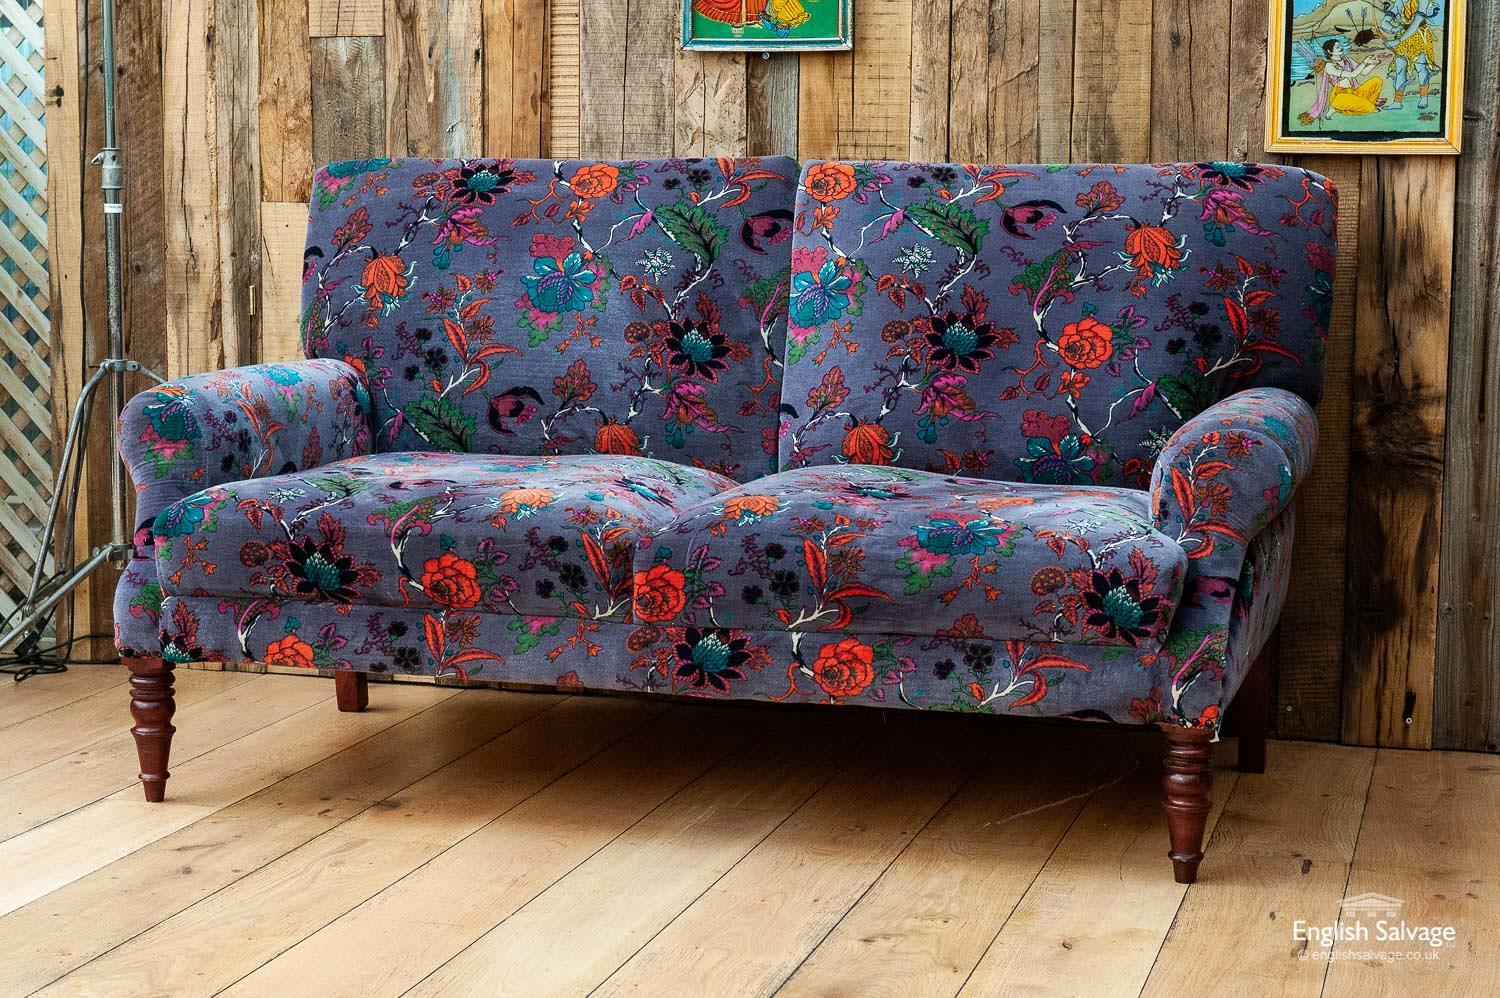 Newly made traditional club style sofas, two-seat, each with turned wooden feet and upholstered in a vibrant floral patterned cotton velvet. The seat height is approximately 44cm. Made in India.